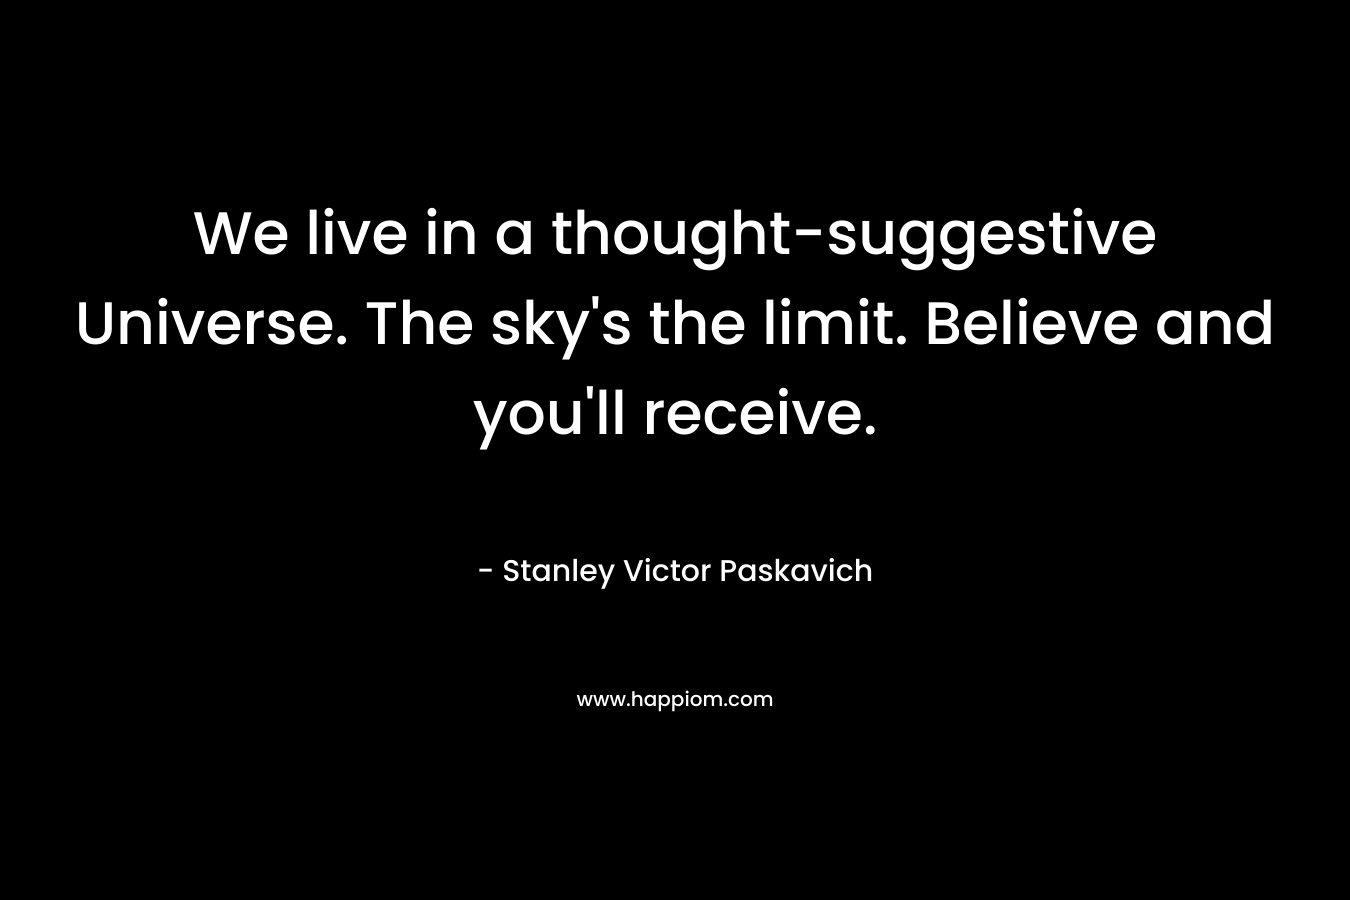 We live in a thought-suggestive Universe. The sky's the limit. Believe and you'll receive.